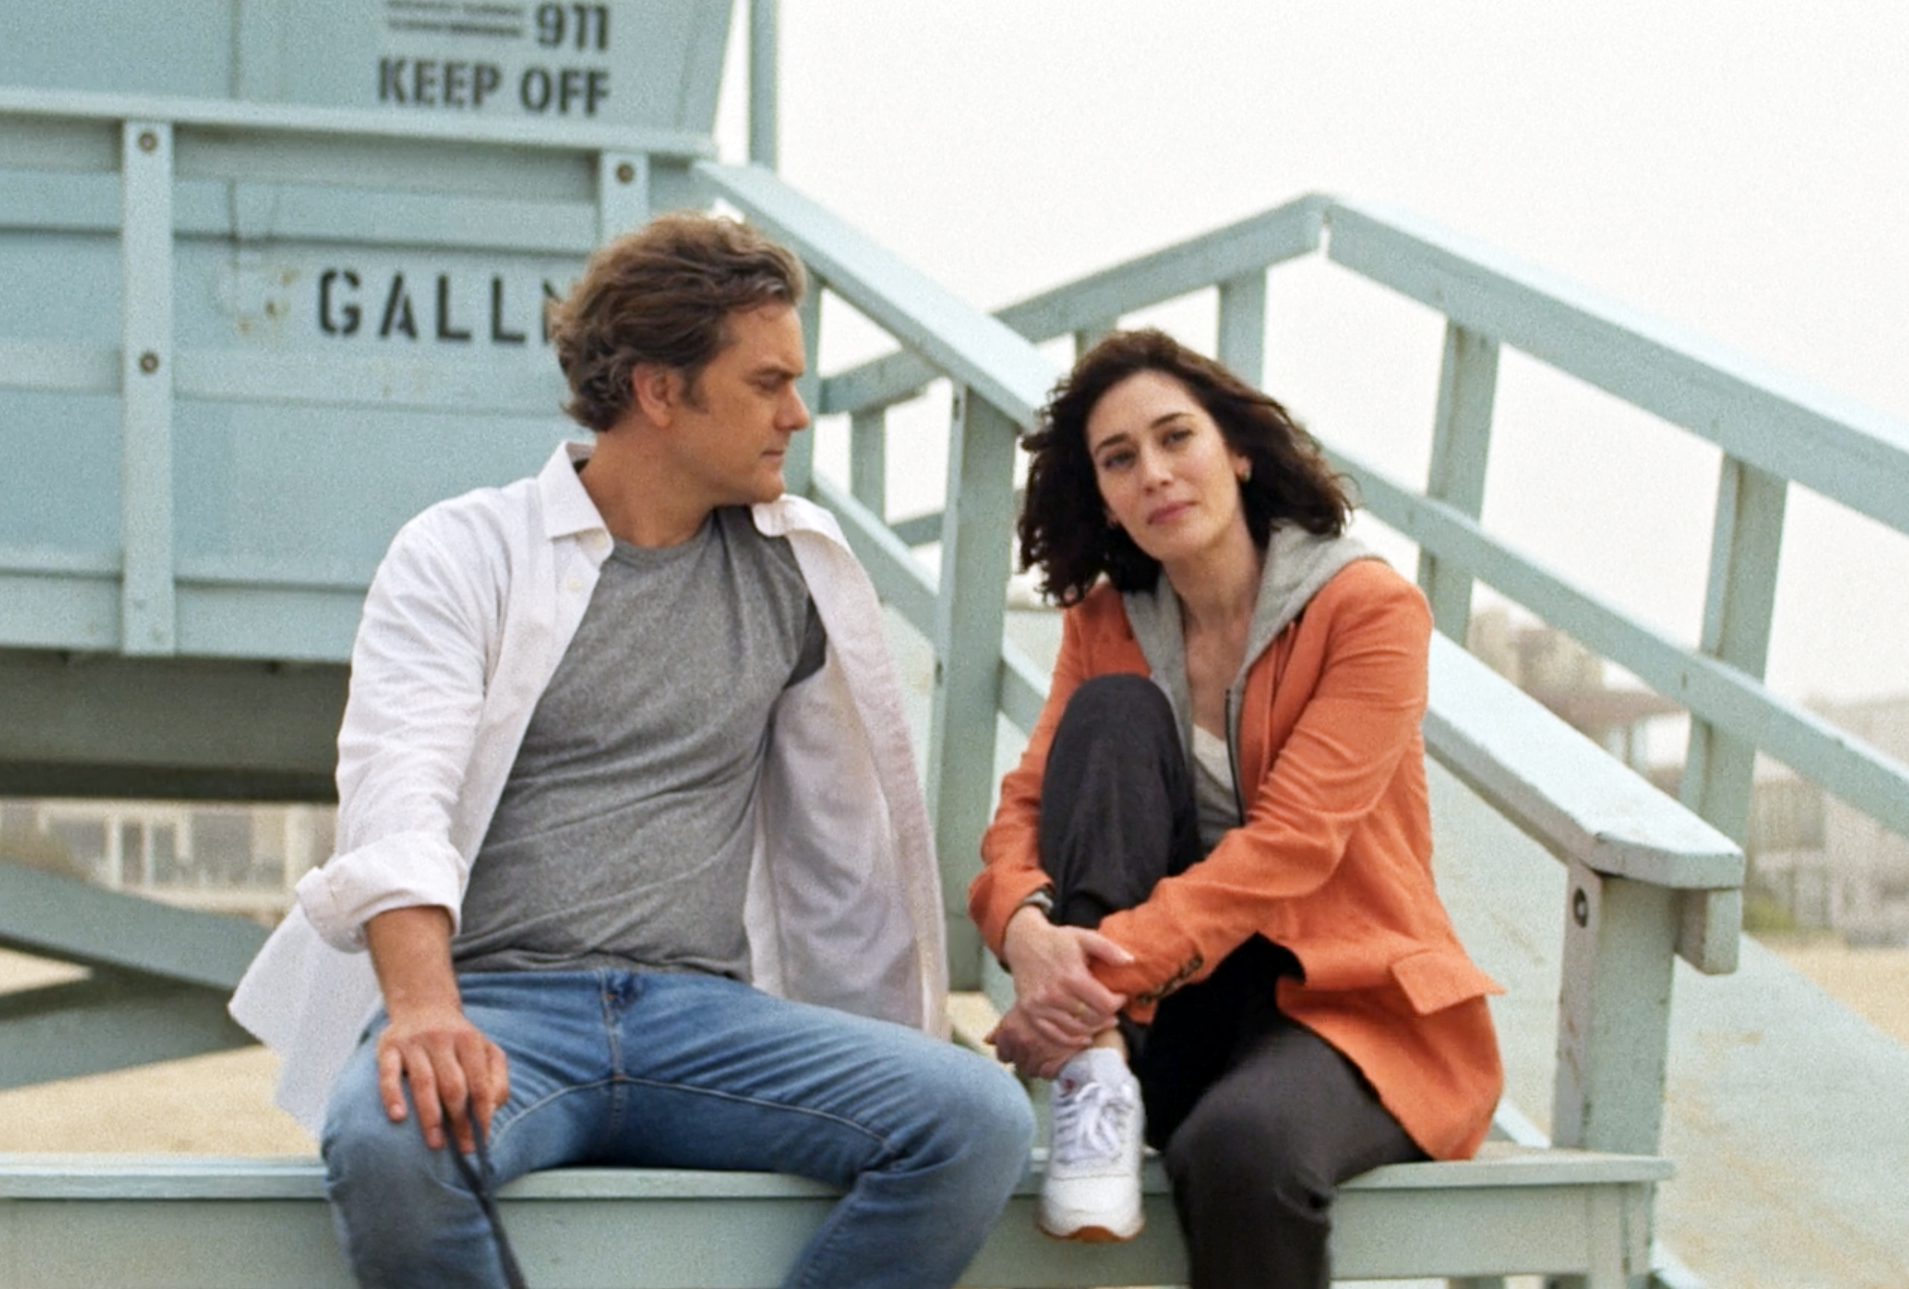 Joshua Jackson as Dan Gallagher, Lizzy Caplan as Alex Forrest in S01E02 of Fatal Attraction 9